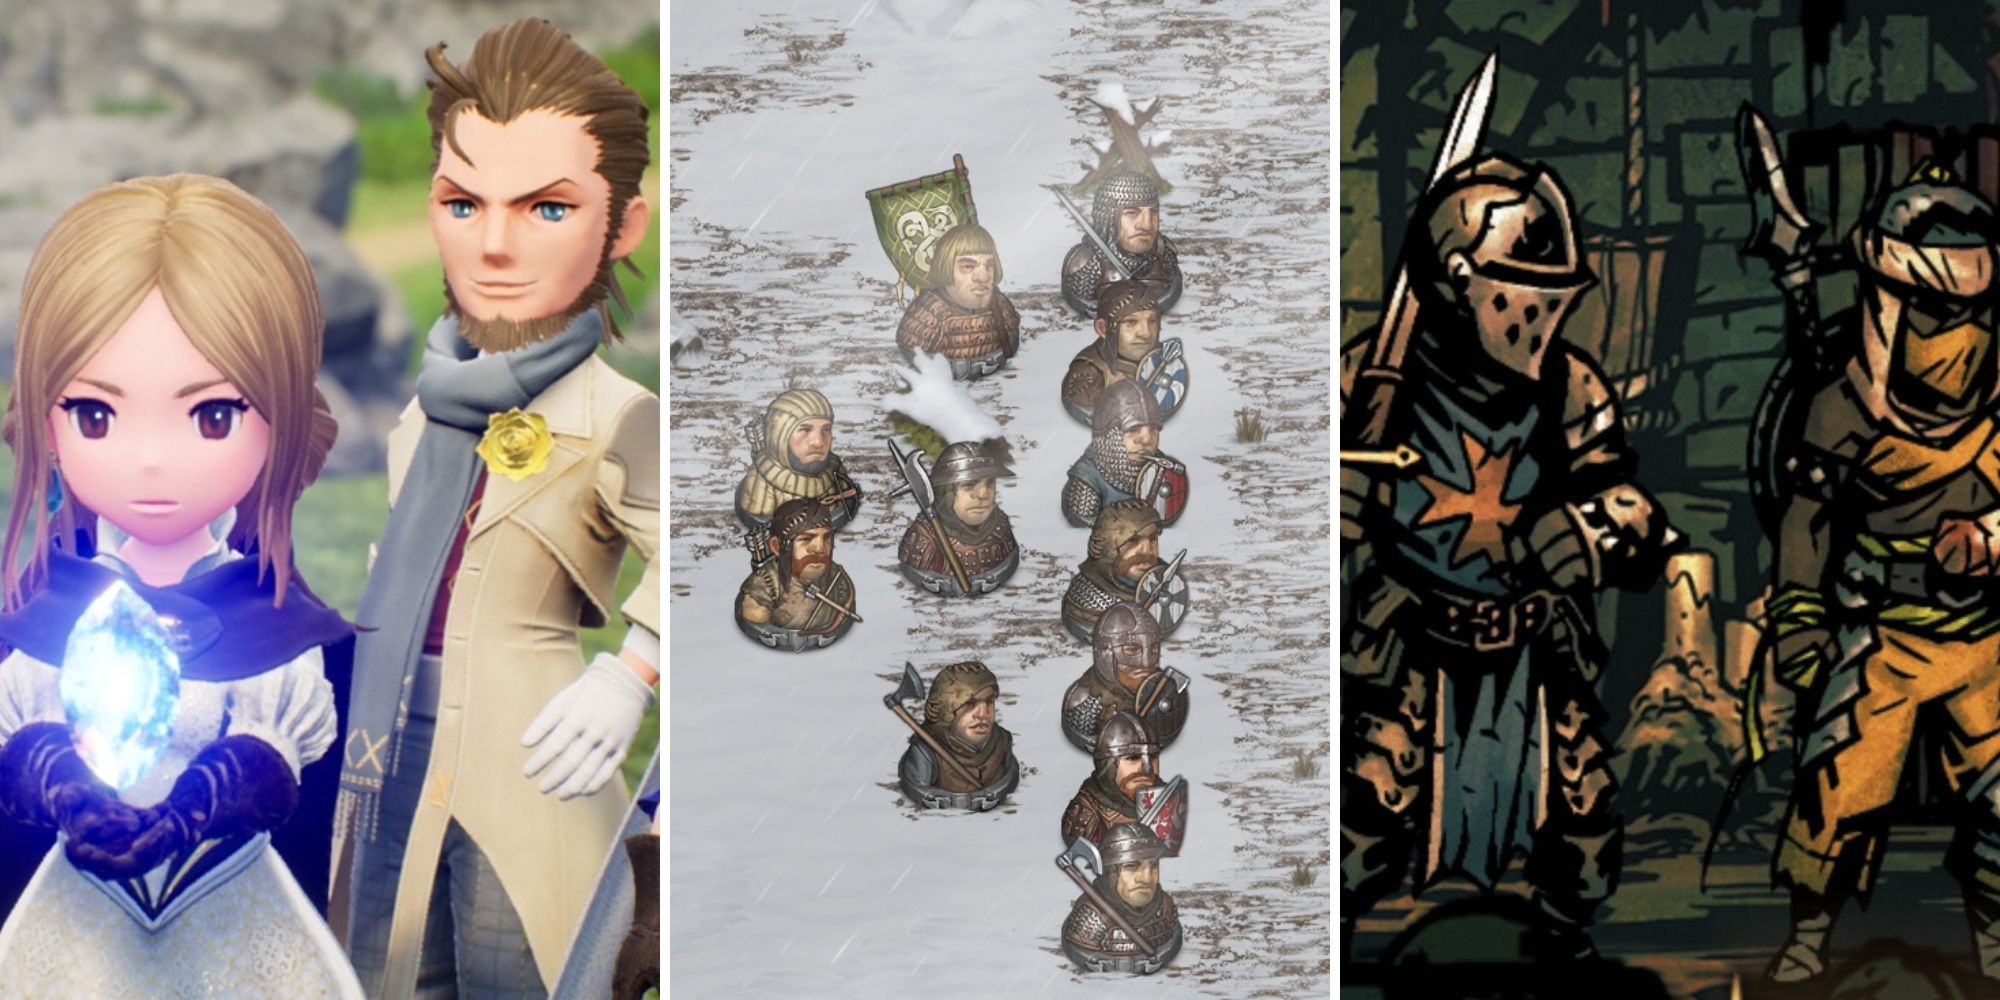 A grid showing three turn-based Role-playing games such as Bravely Default, Battle Brothers, and Darkest Dungeon